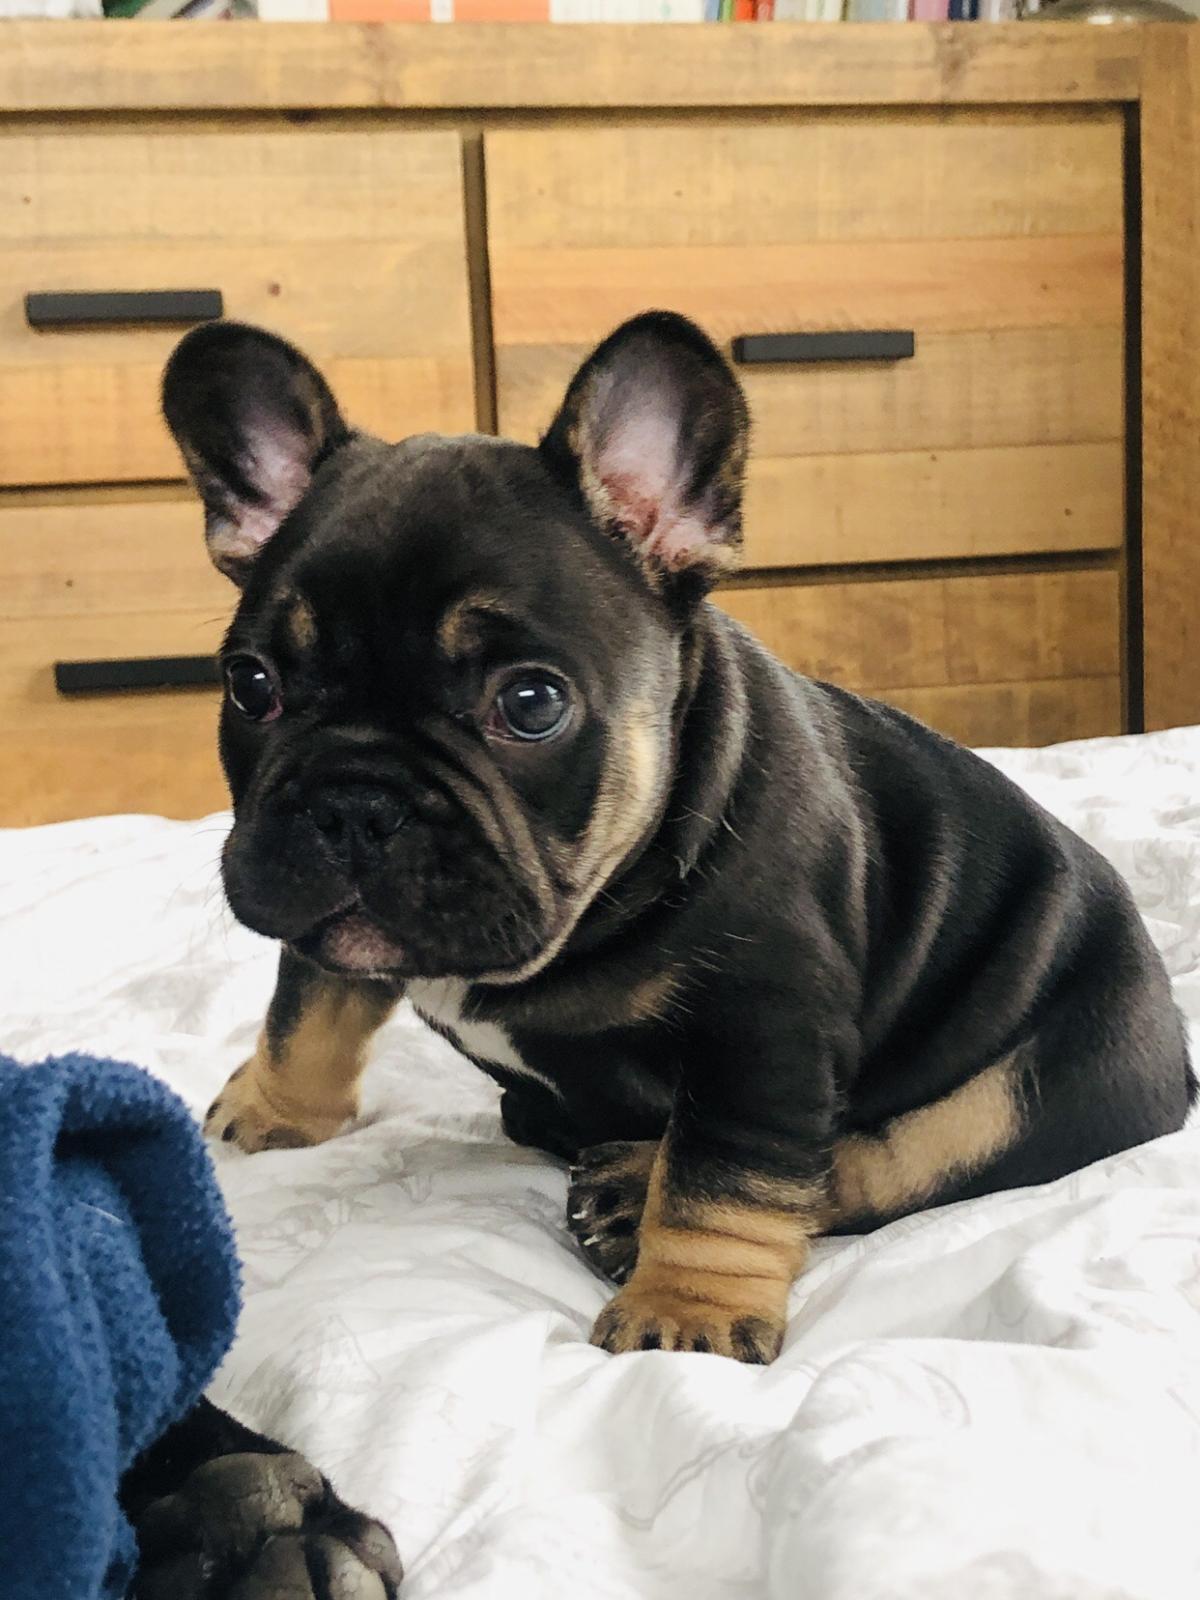 Pedigree French bulldogs - Snub Nosed K9's - Dogs for Sale NZ & AUS